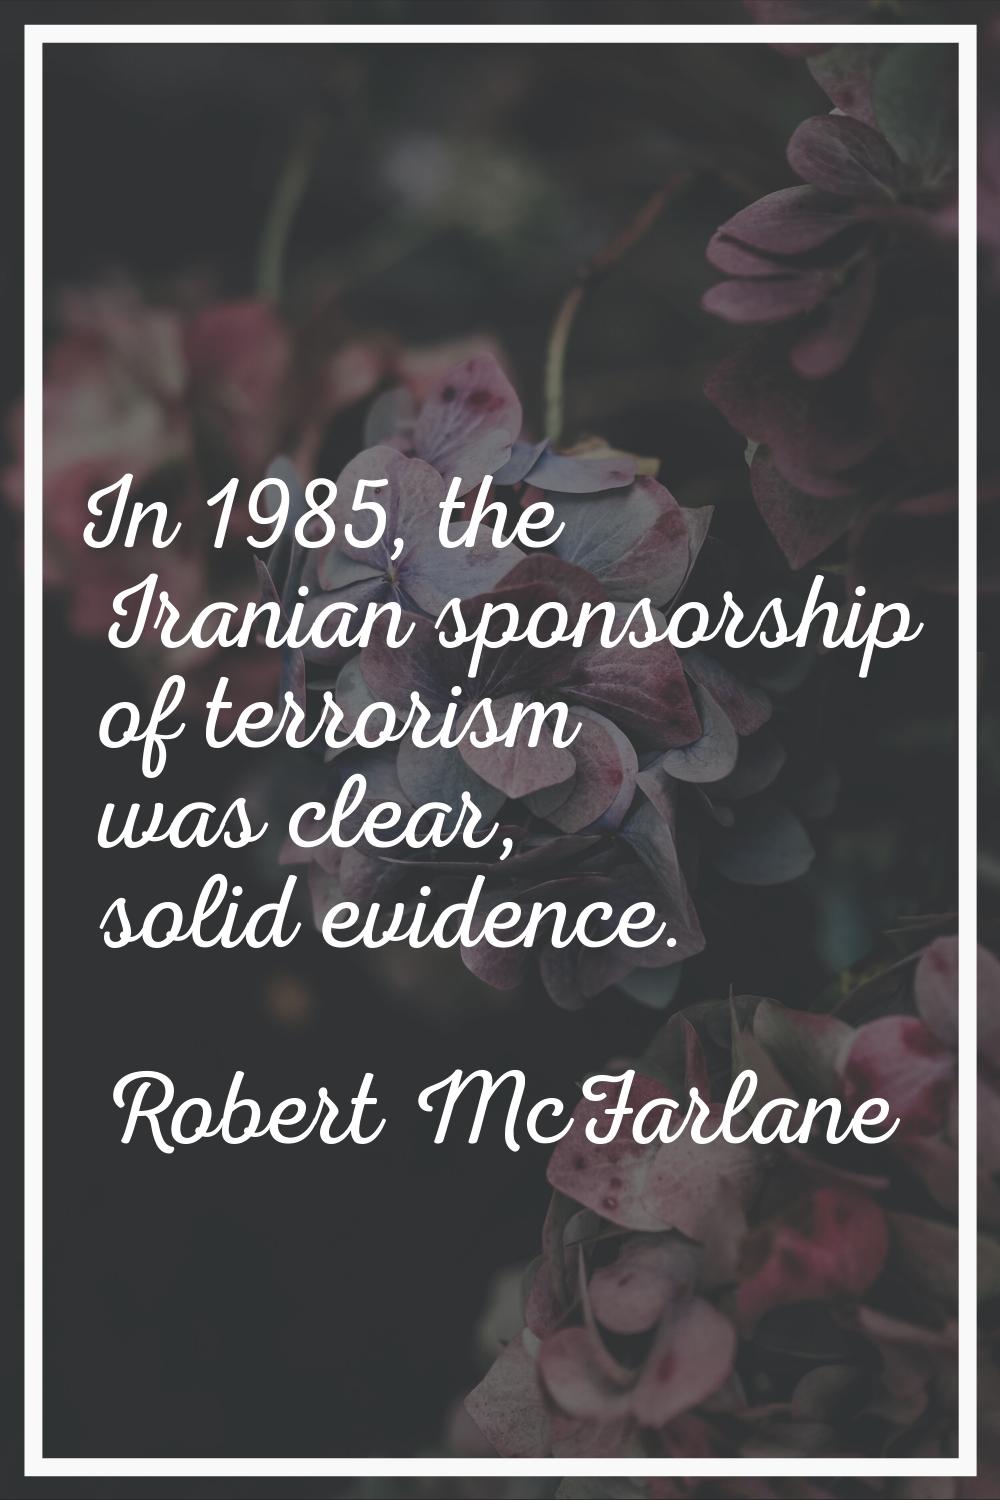 In 1985, the Iranian sponsorship of terrorism was clear, solid evidence.